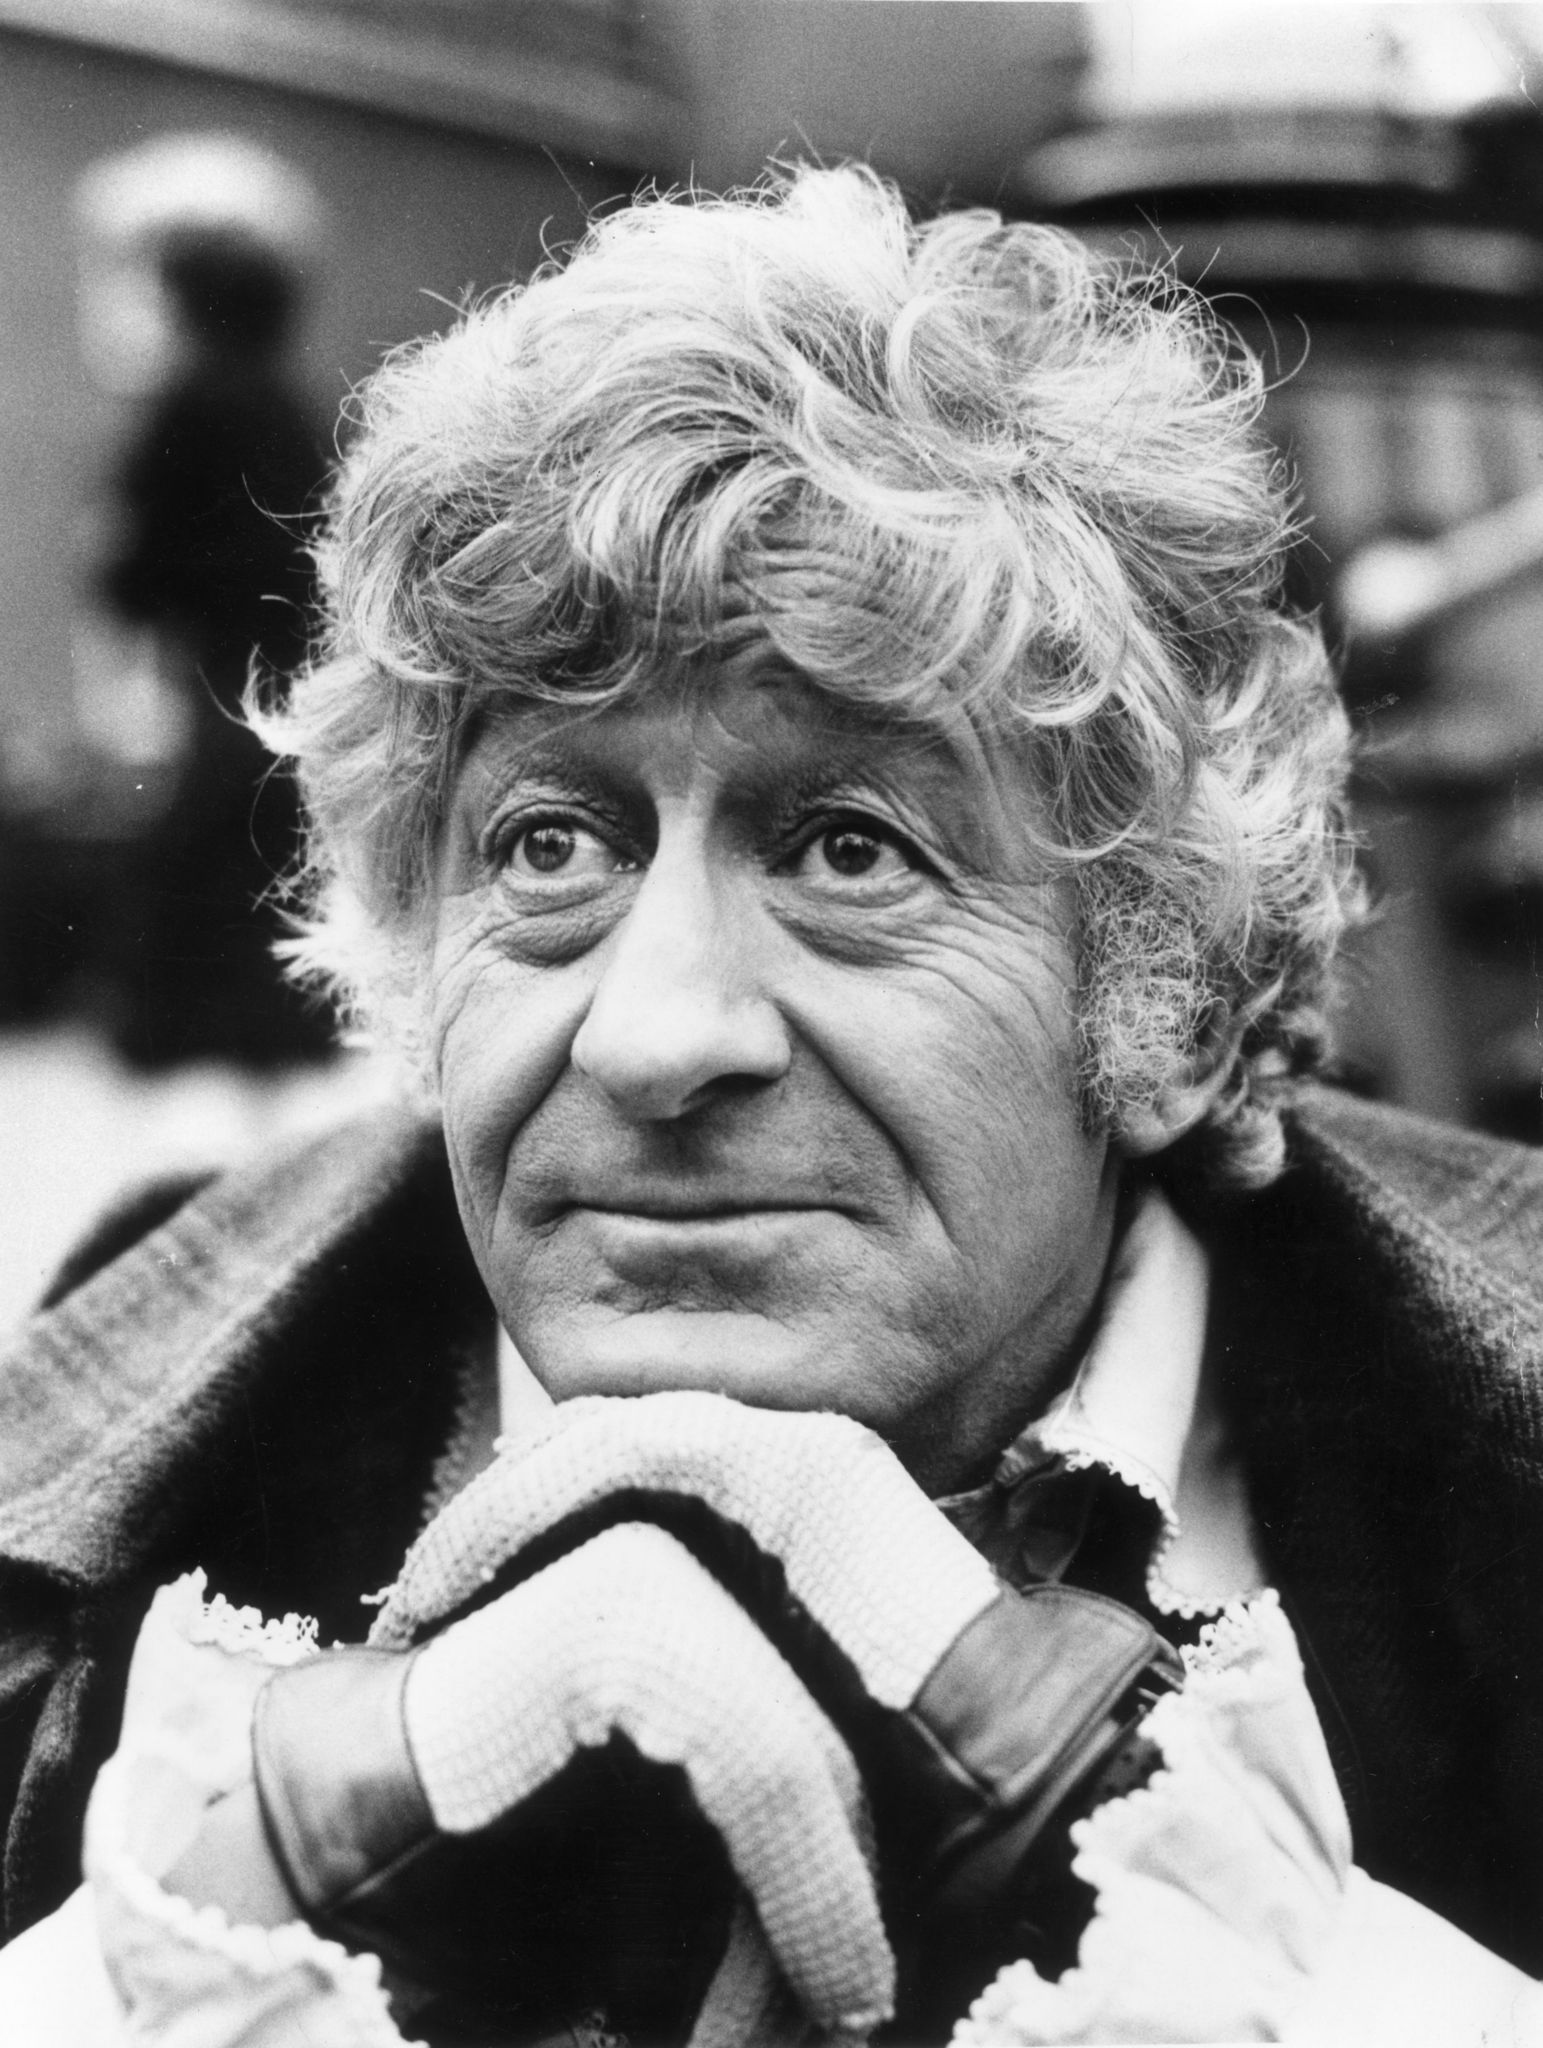 Actor Jon Pertwee (1919 - 1996) as Dr Who from the BBC children's television series of the same name.